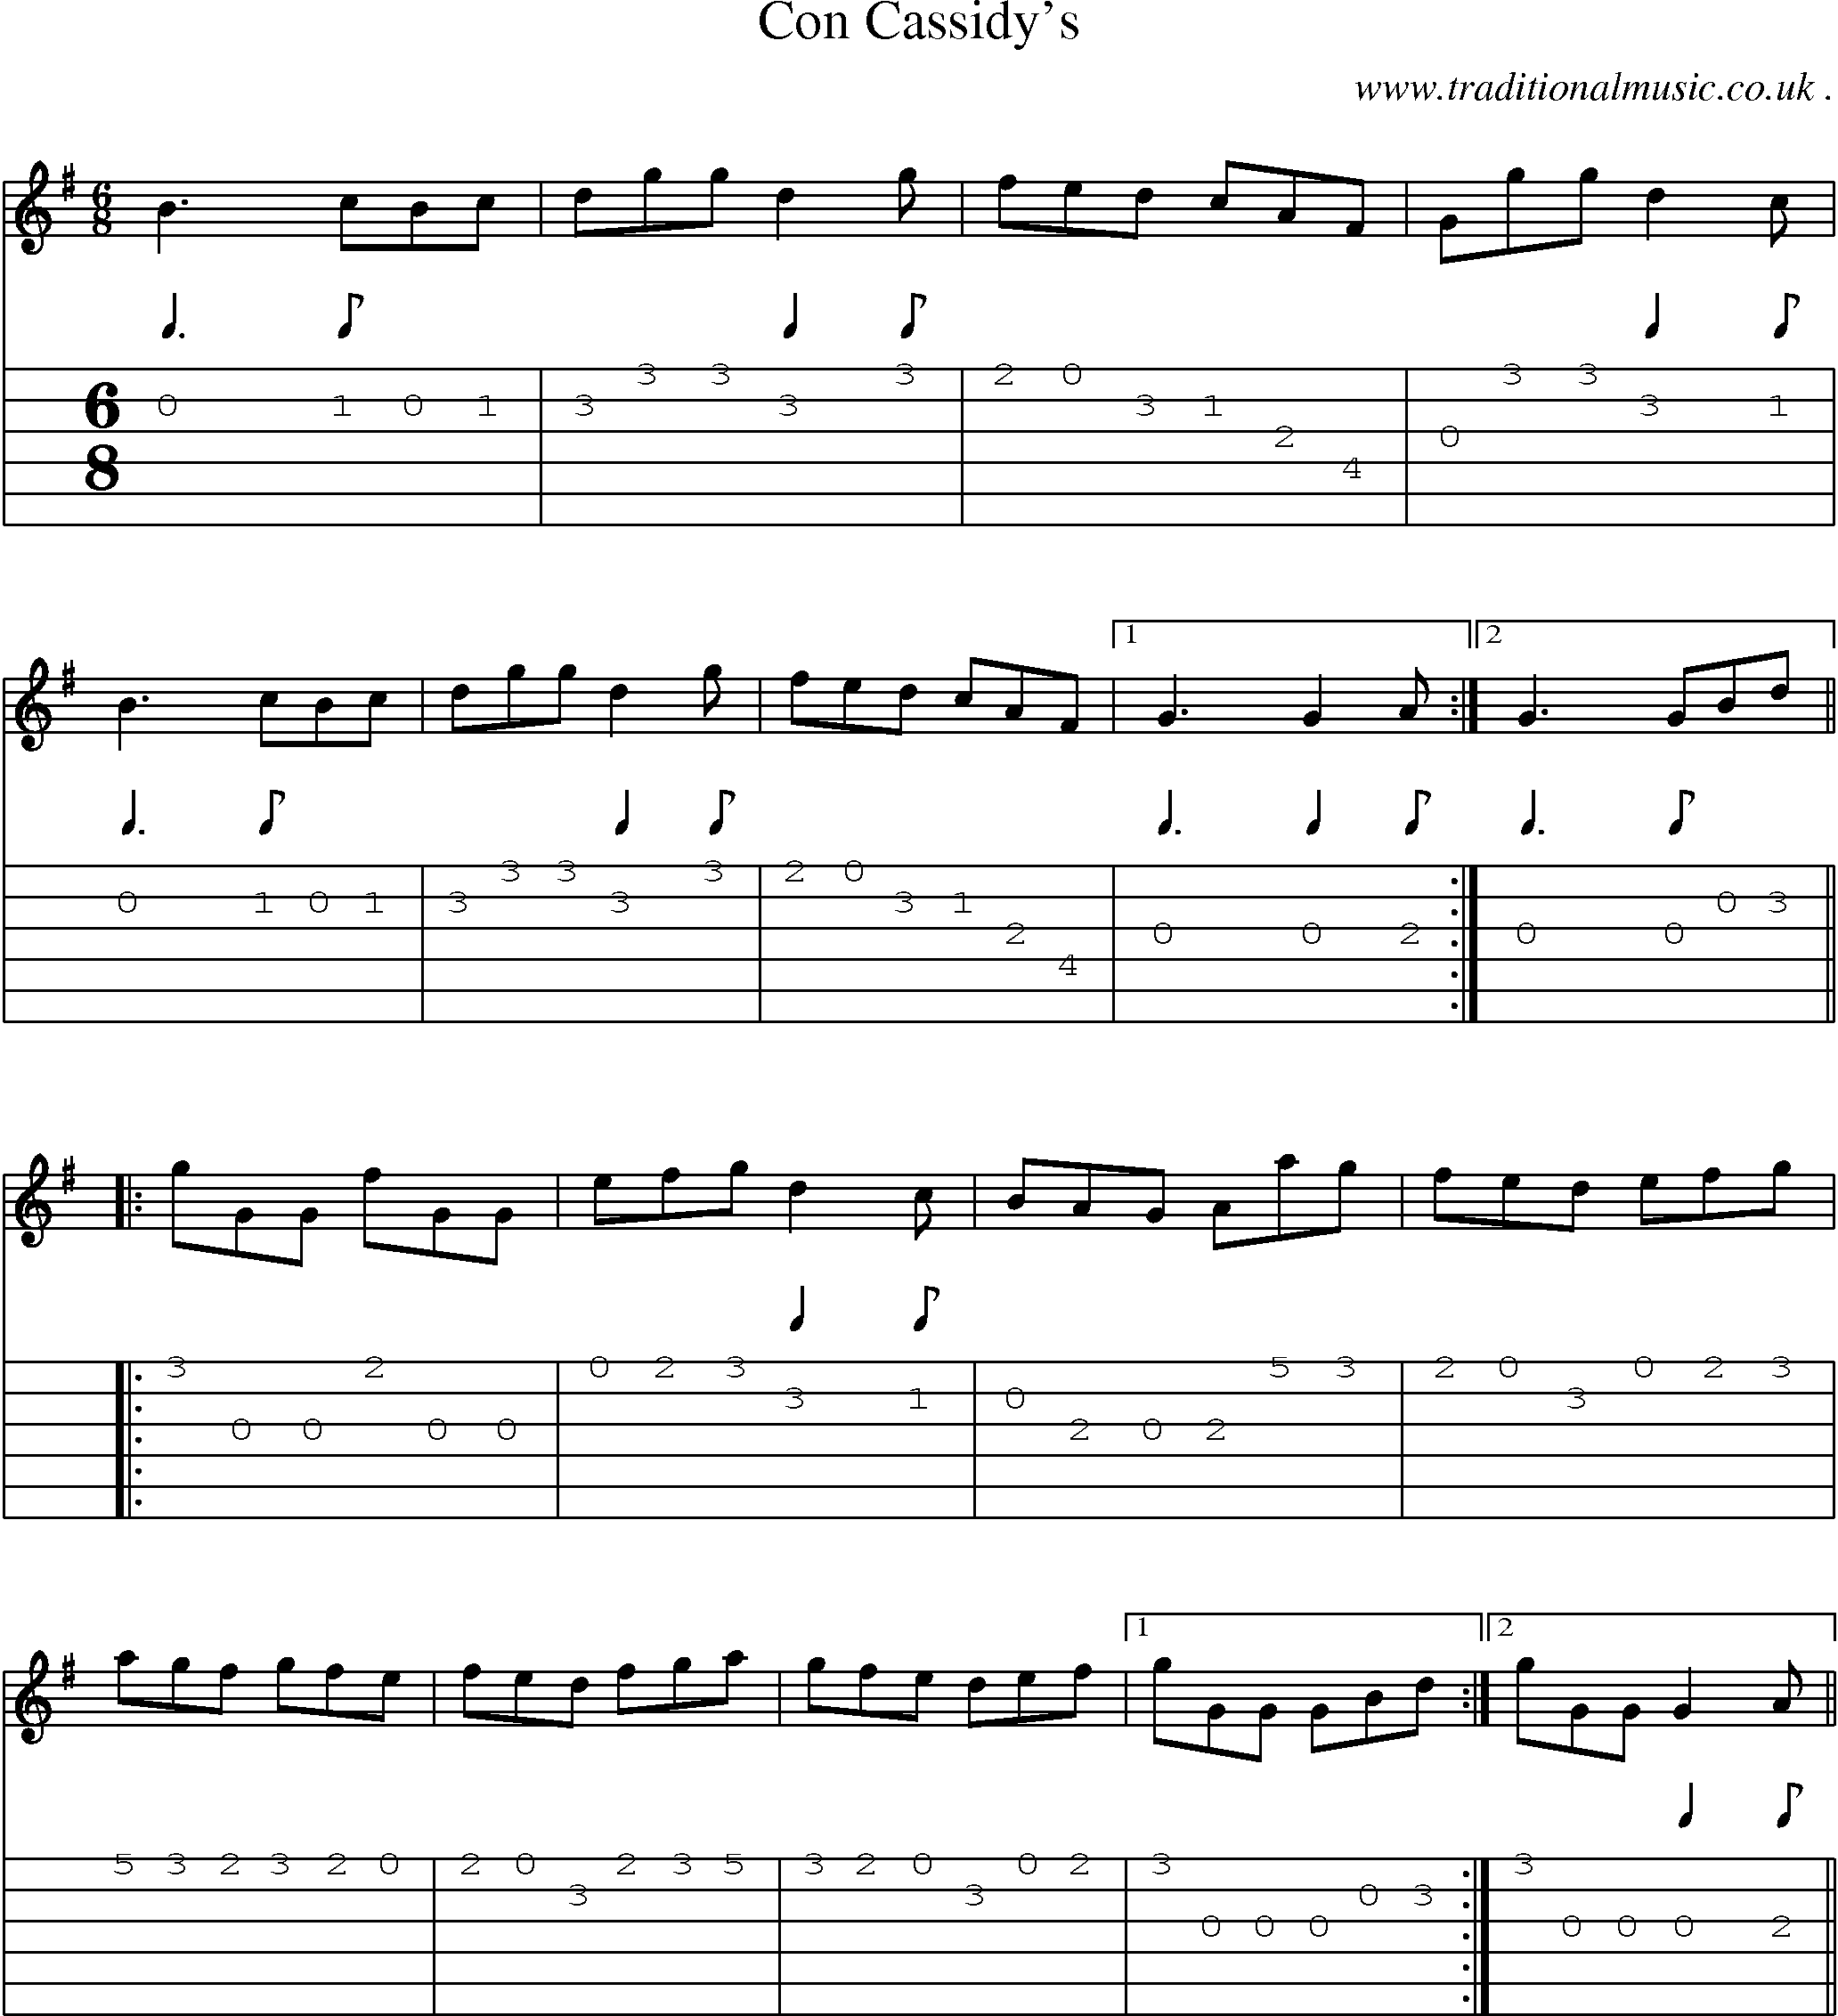 Sheet-Music and Guitar Tabs for Con Cassidys